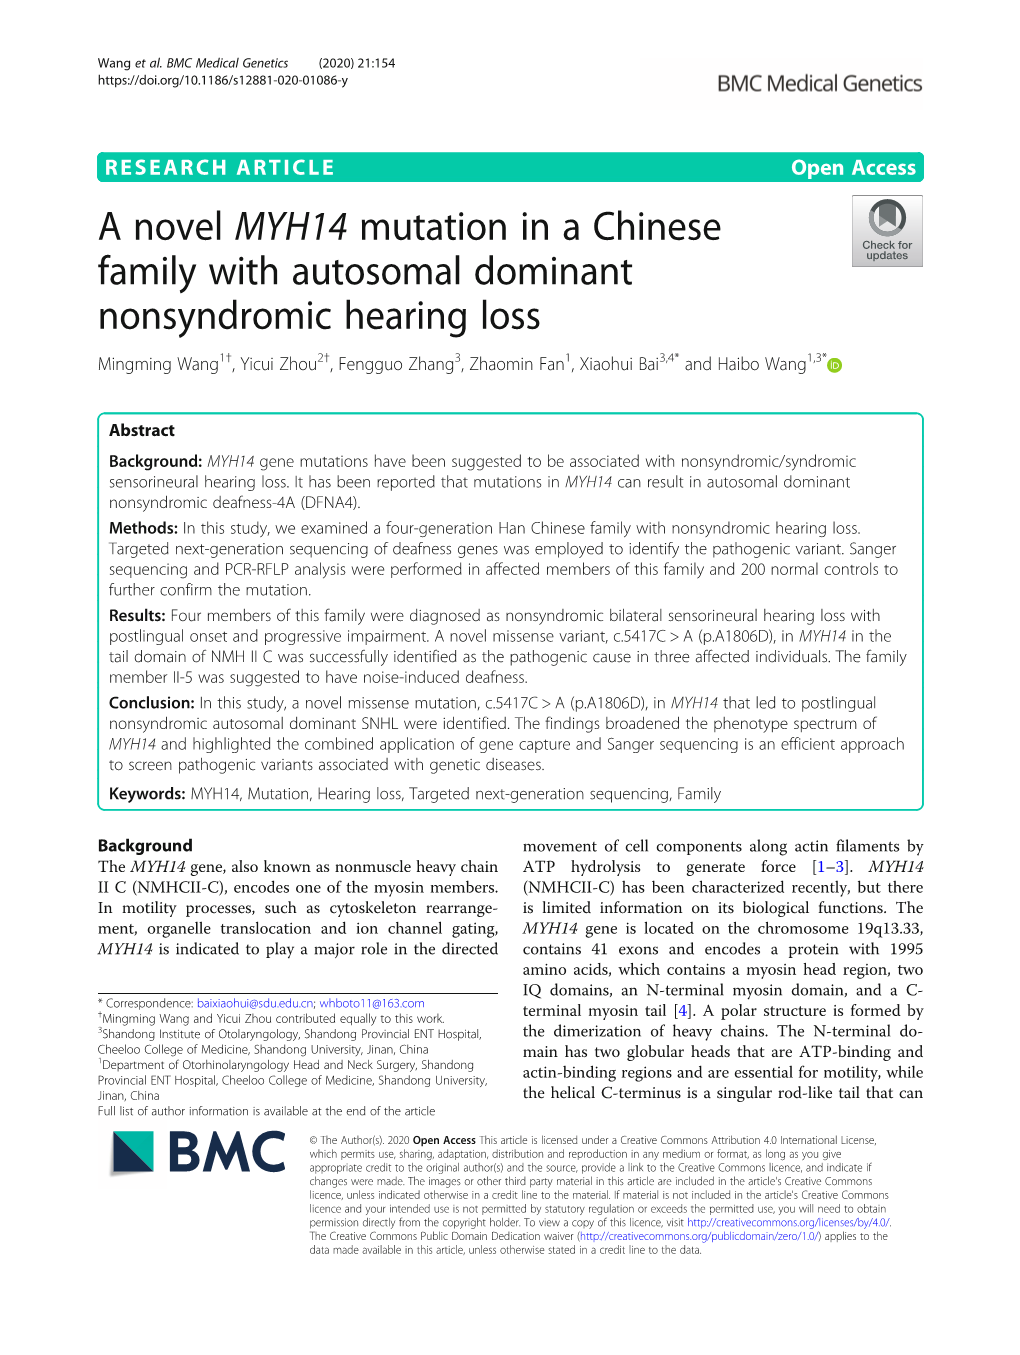 A Novel MYH14 Mutation in a Chinese Family with Autosomal Dominant